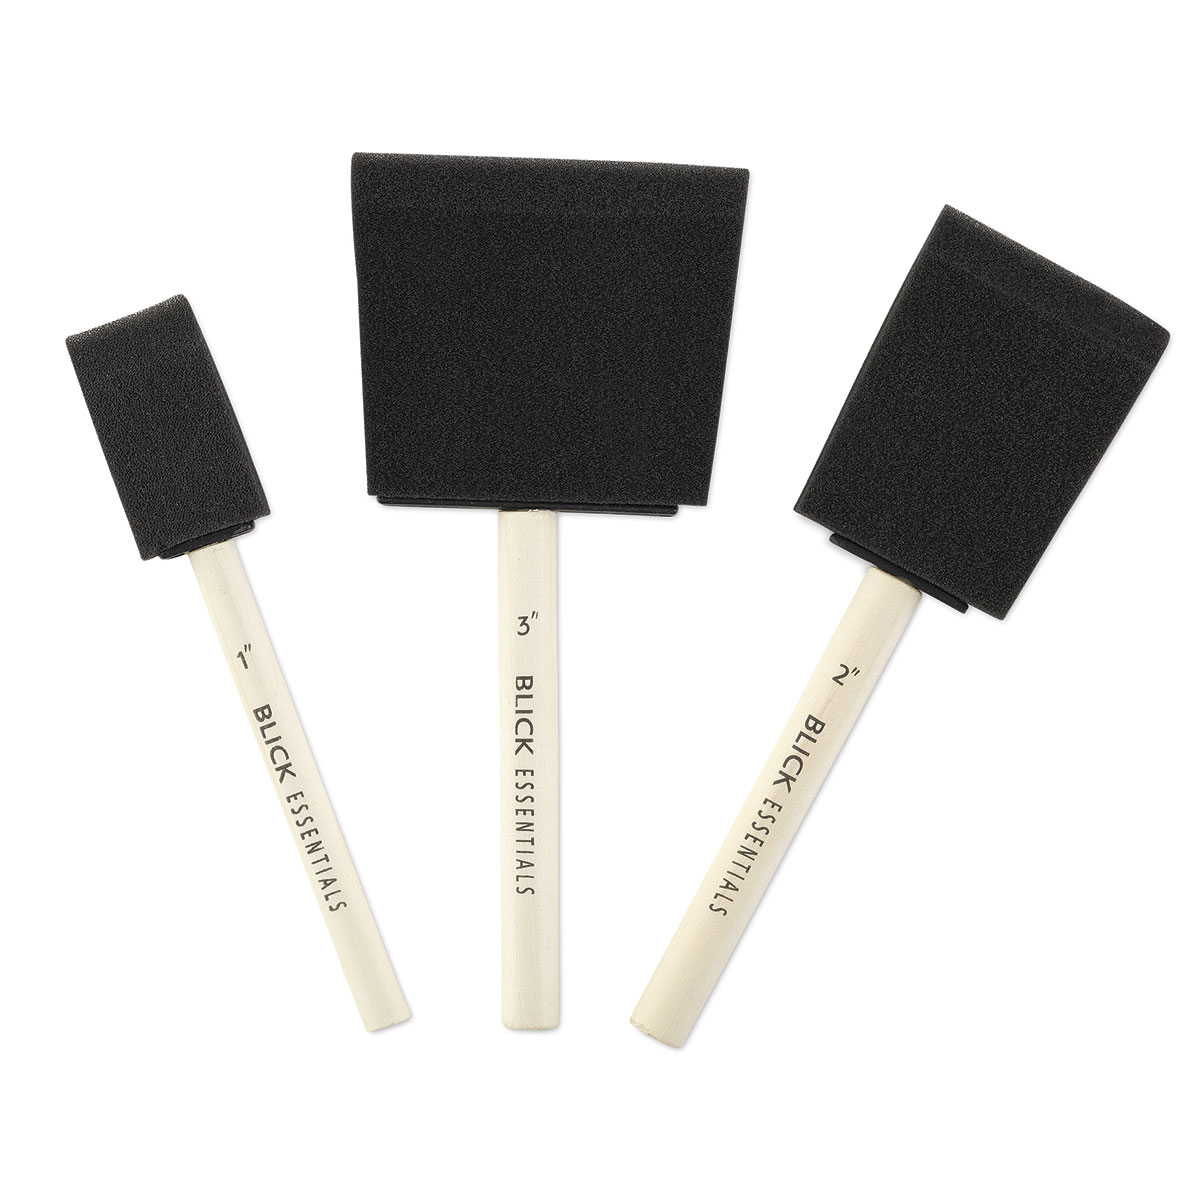 10 FOAM PAINT BRUSHES PAINTING BRUSHES DURABLE JUMBO PACK //SEE MY OTHER LISTINGS